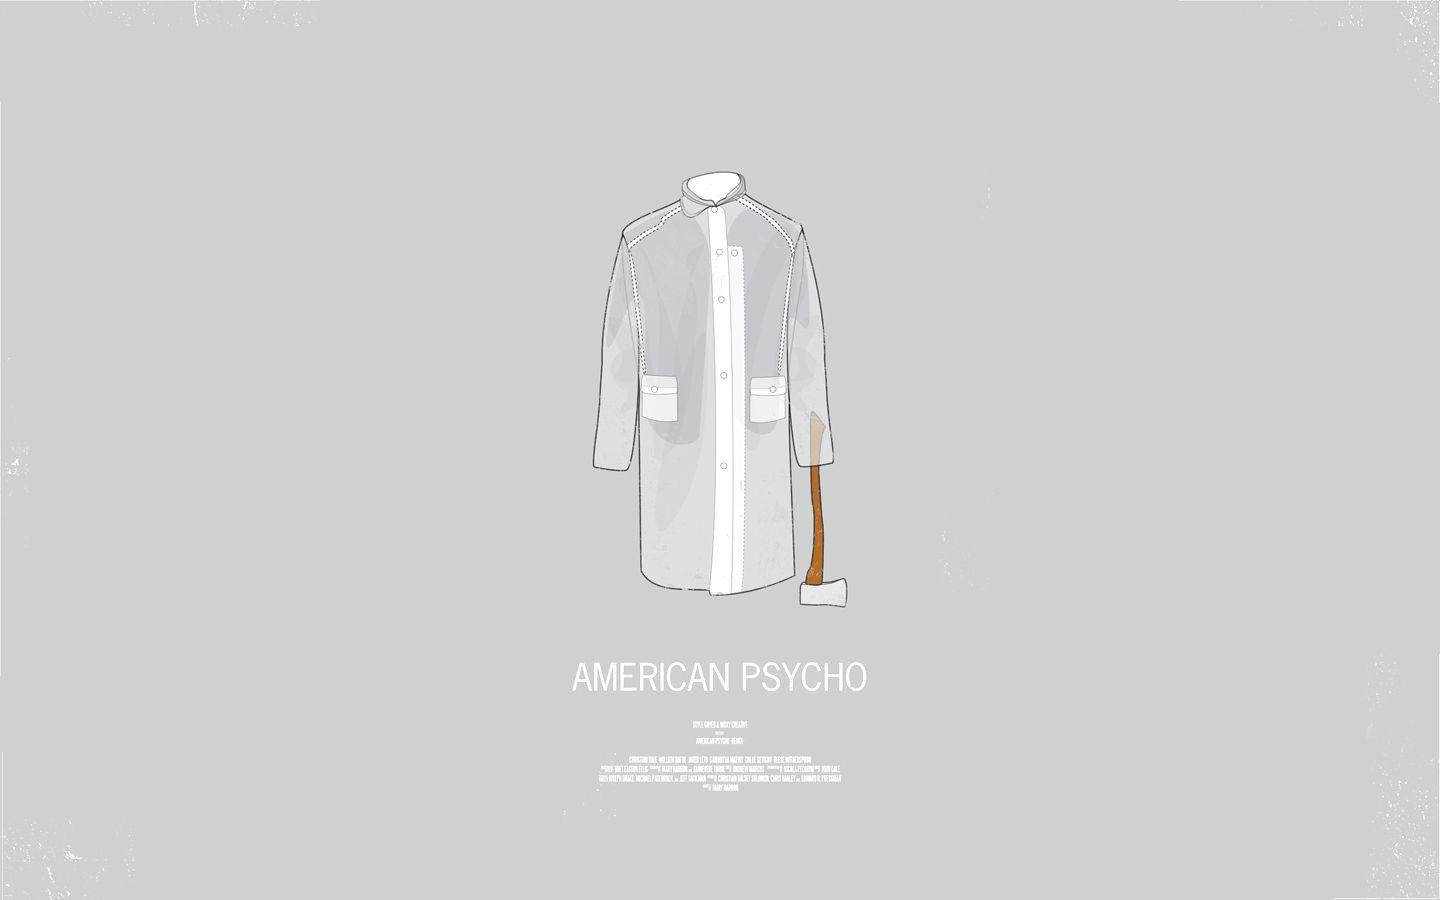 Download the American Psycho Wallpaper, American Psycho iPhone